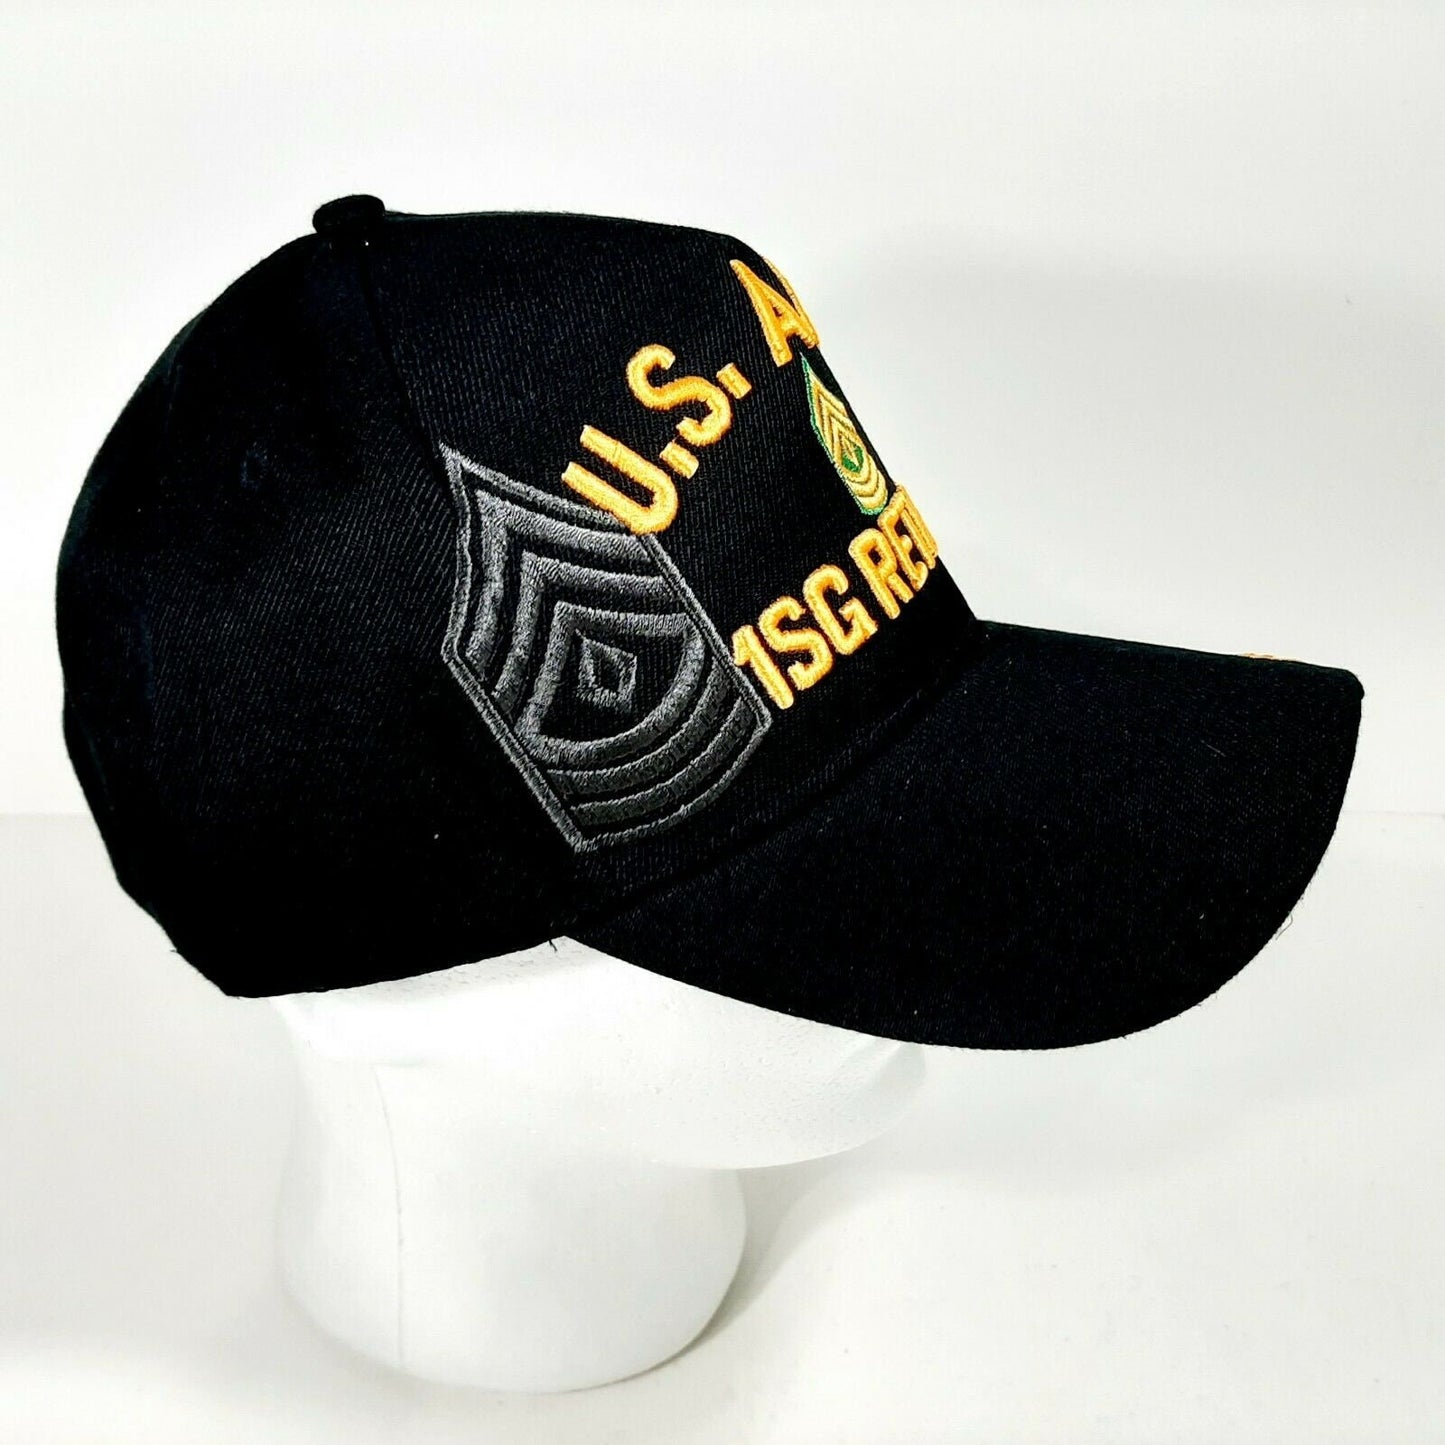 US Army 1SG Retired Men's Ball Cap Hat Black Embroidered Acrylic